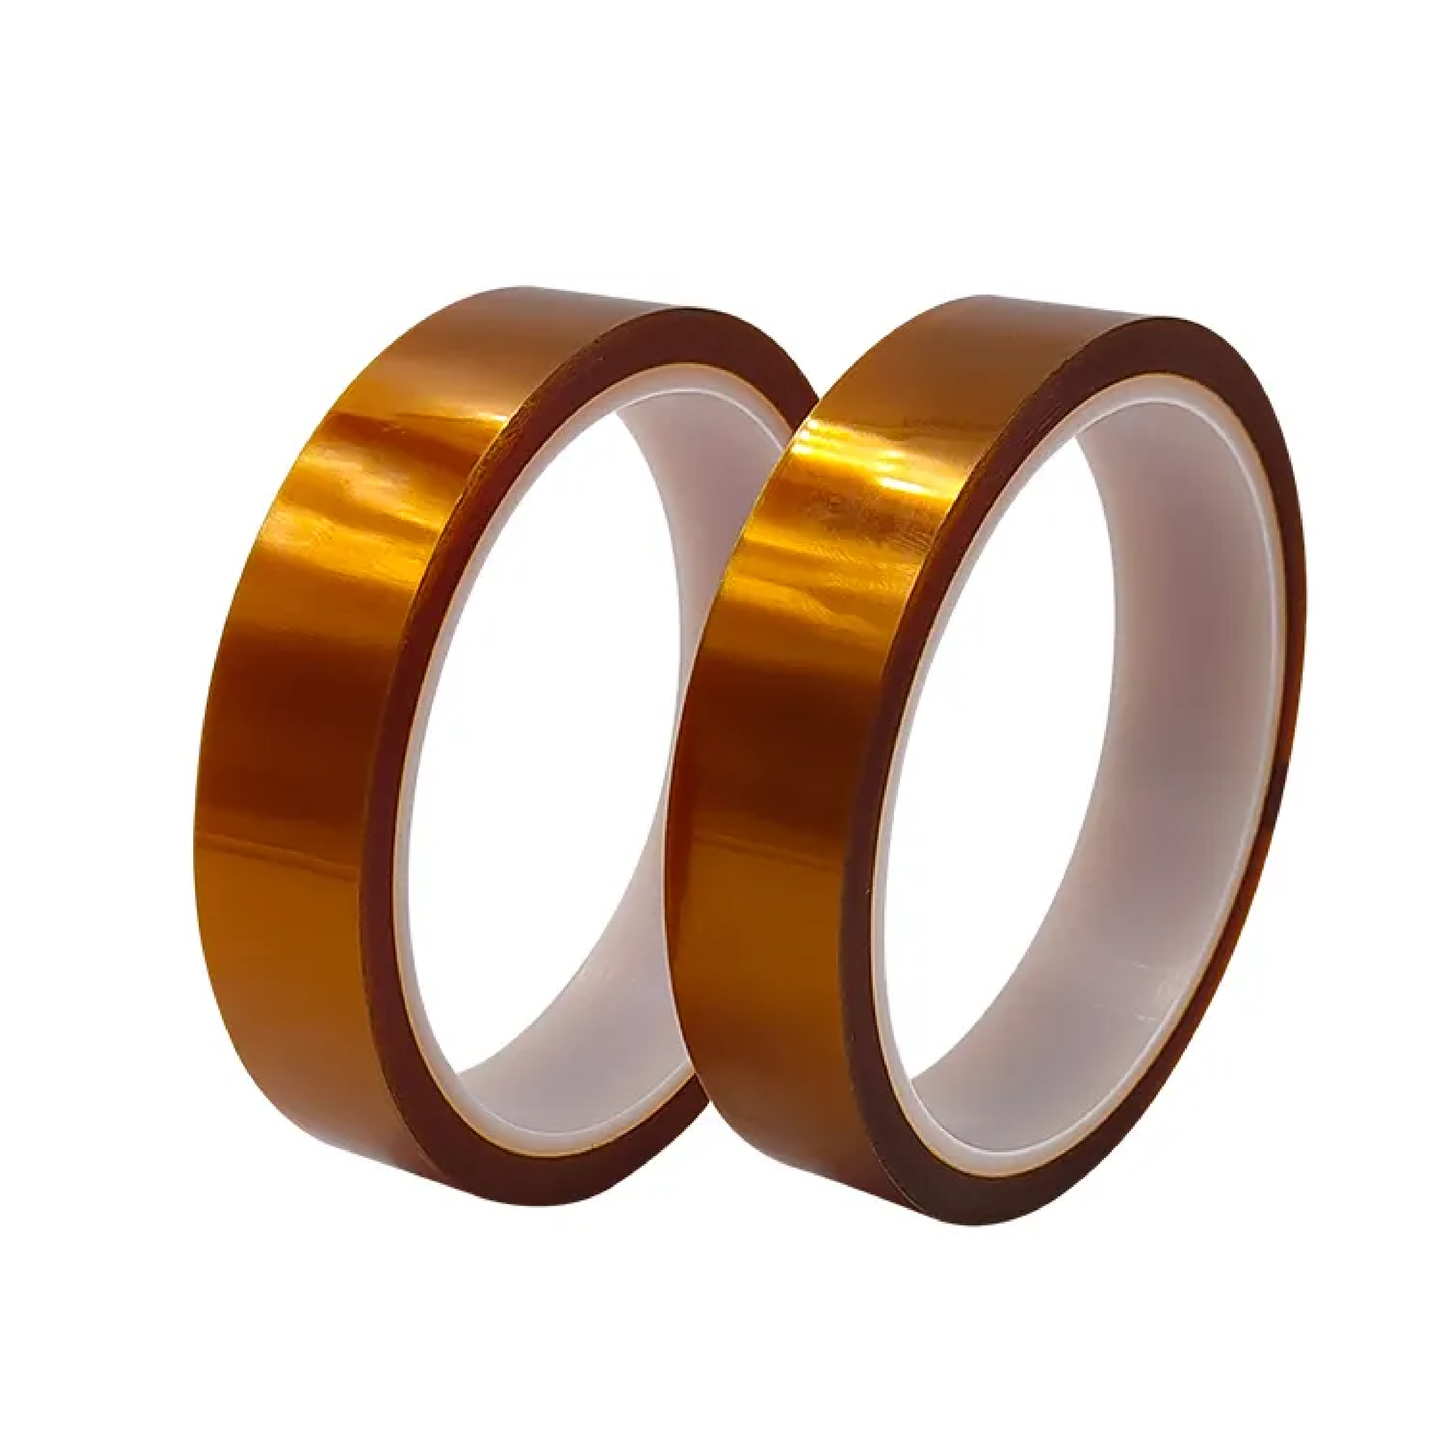 1 x 20MM x 33M Heat Resistant  Tape, For High Temperature